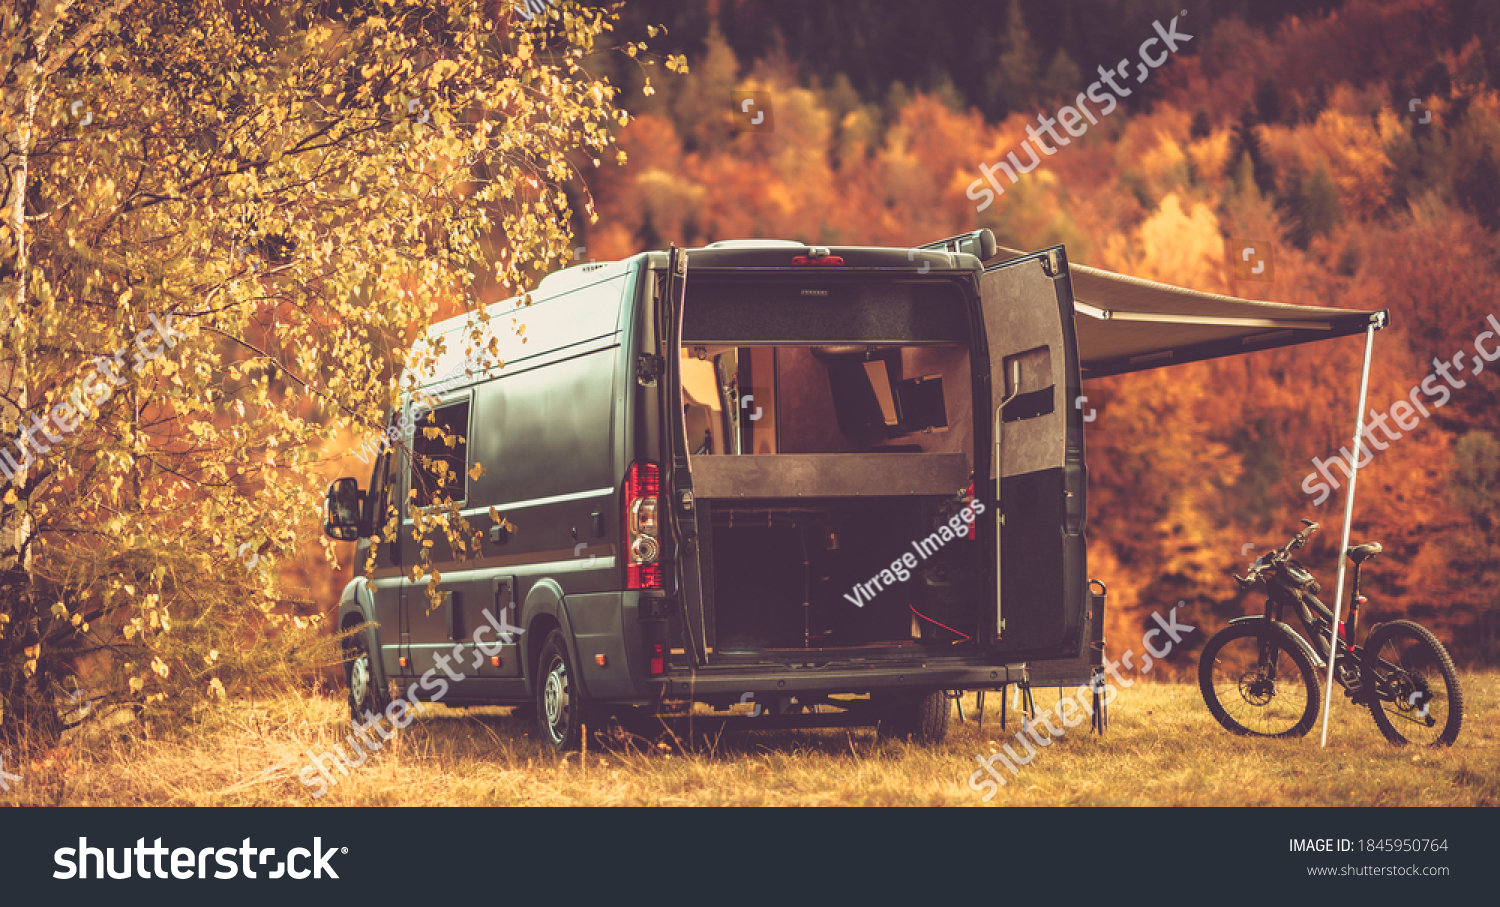 Scenic Recreational Vehicle RV Camping Spot with Fall Foliage Scenery. Class B Motorhome Boondocking in the Remote Place. Outdoor and Recreation Theme. #1845950764